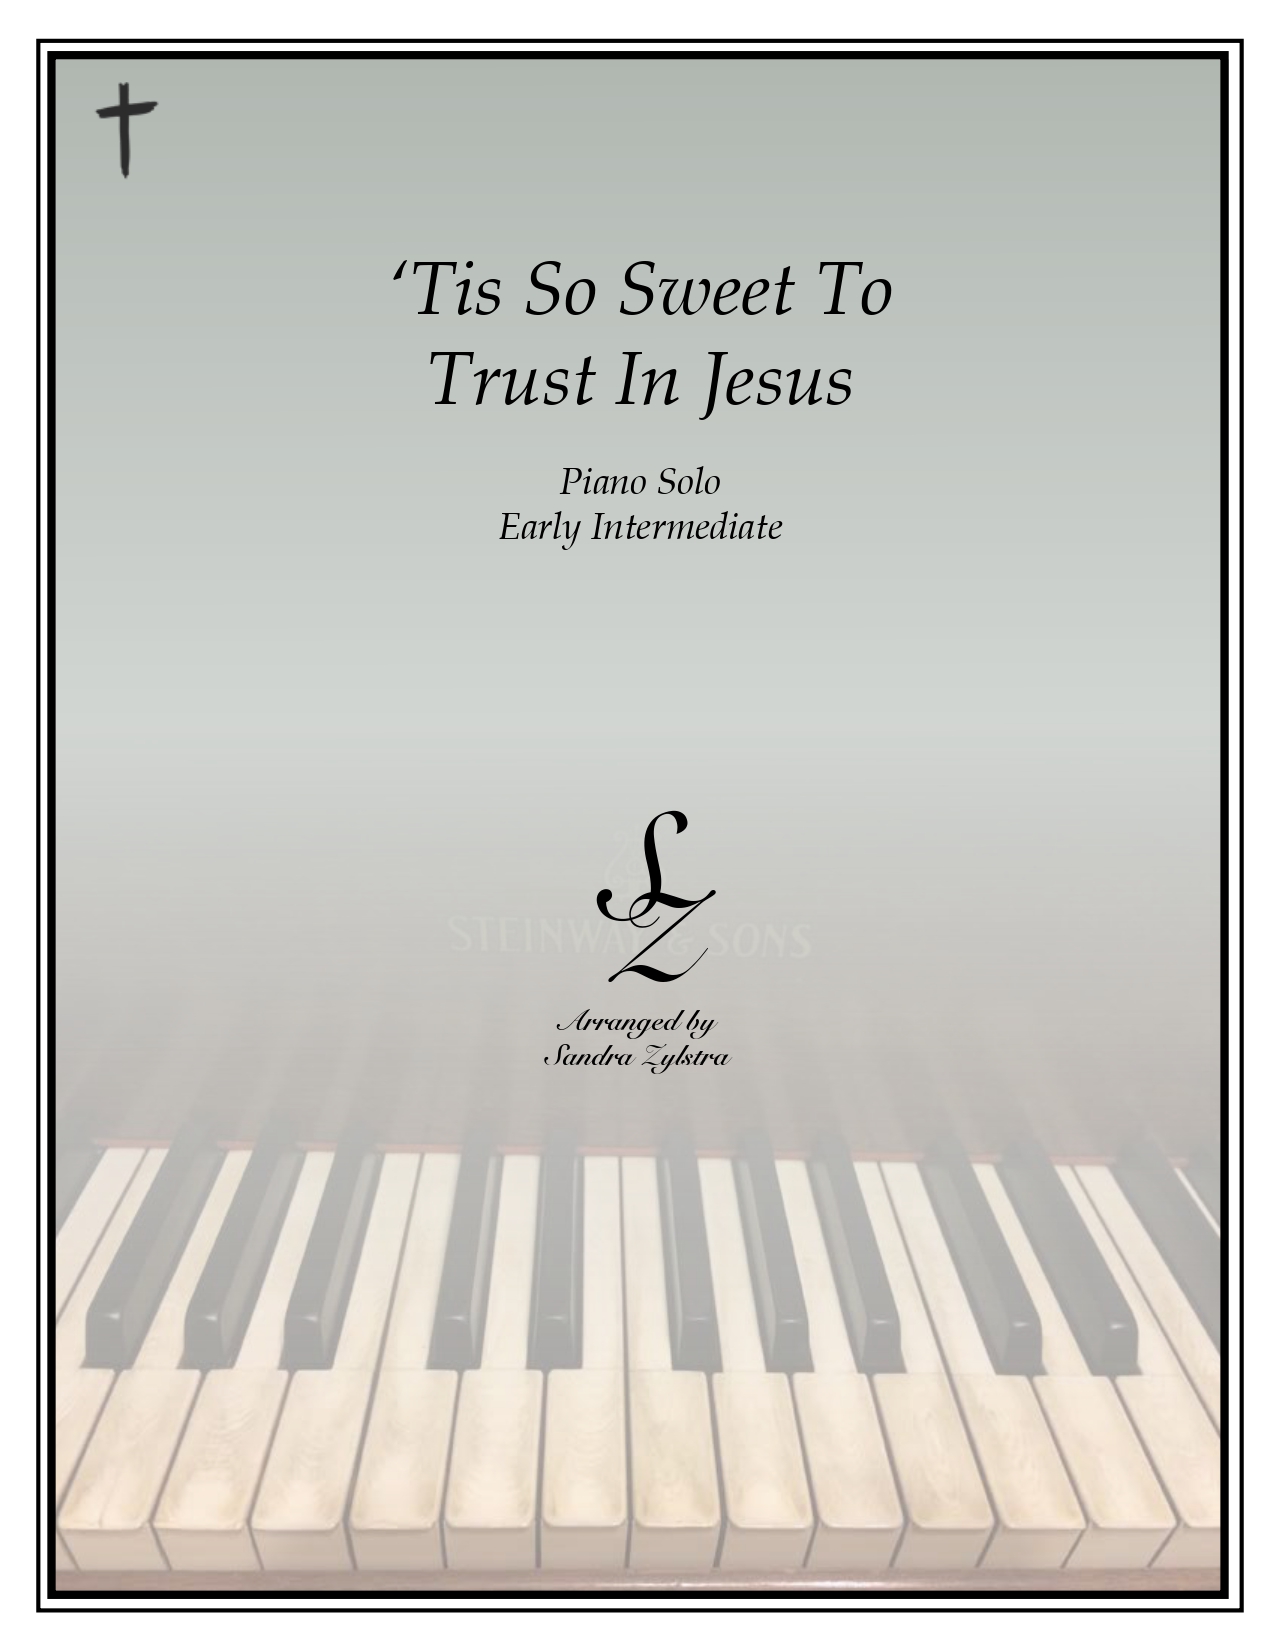 Tis So Sweet To Trust In Jesus early intermediate cover page 00011